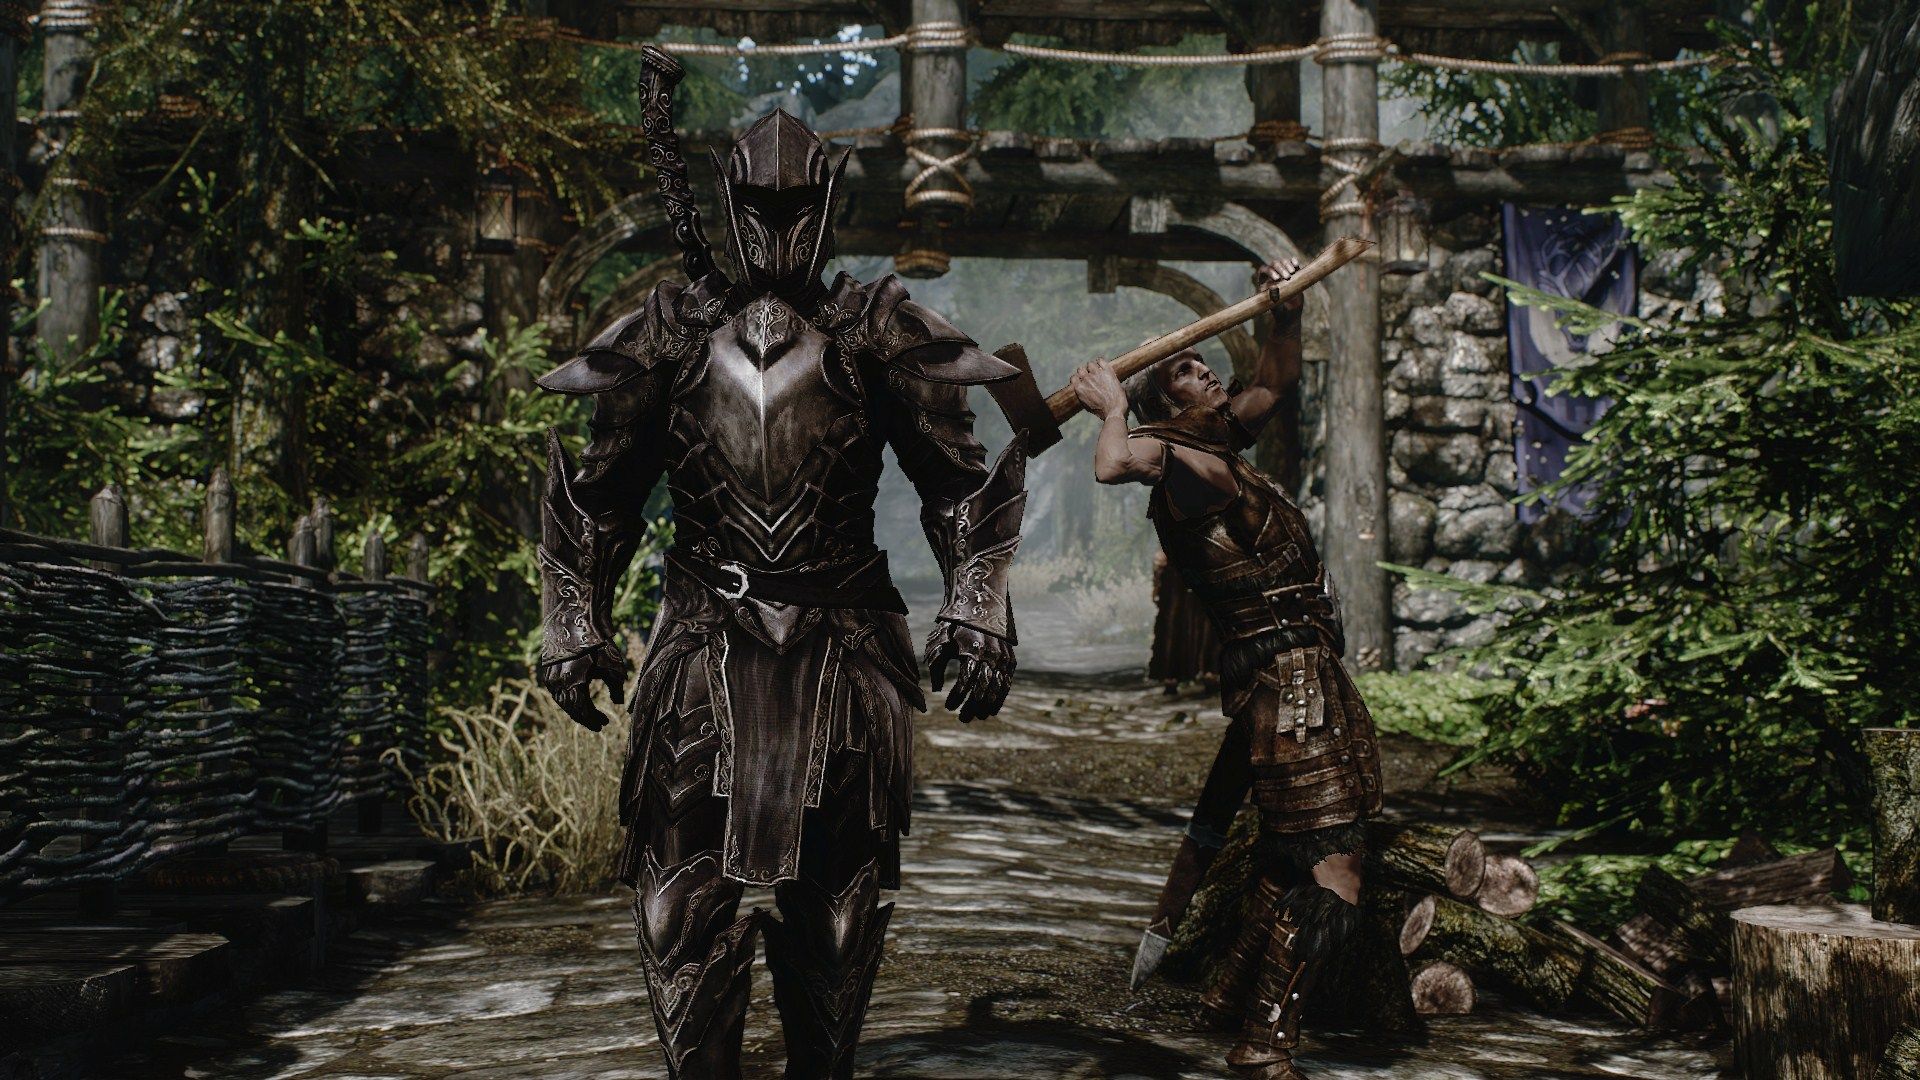 The Ebony Warrior walking through Falkreath while another character chops wood in the back.